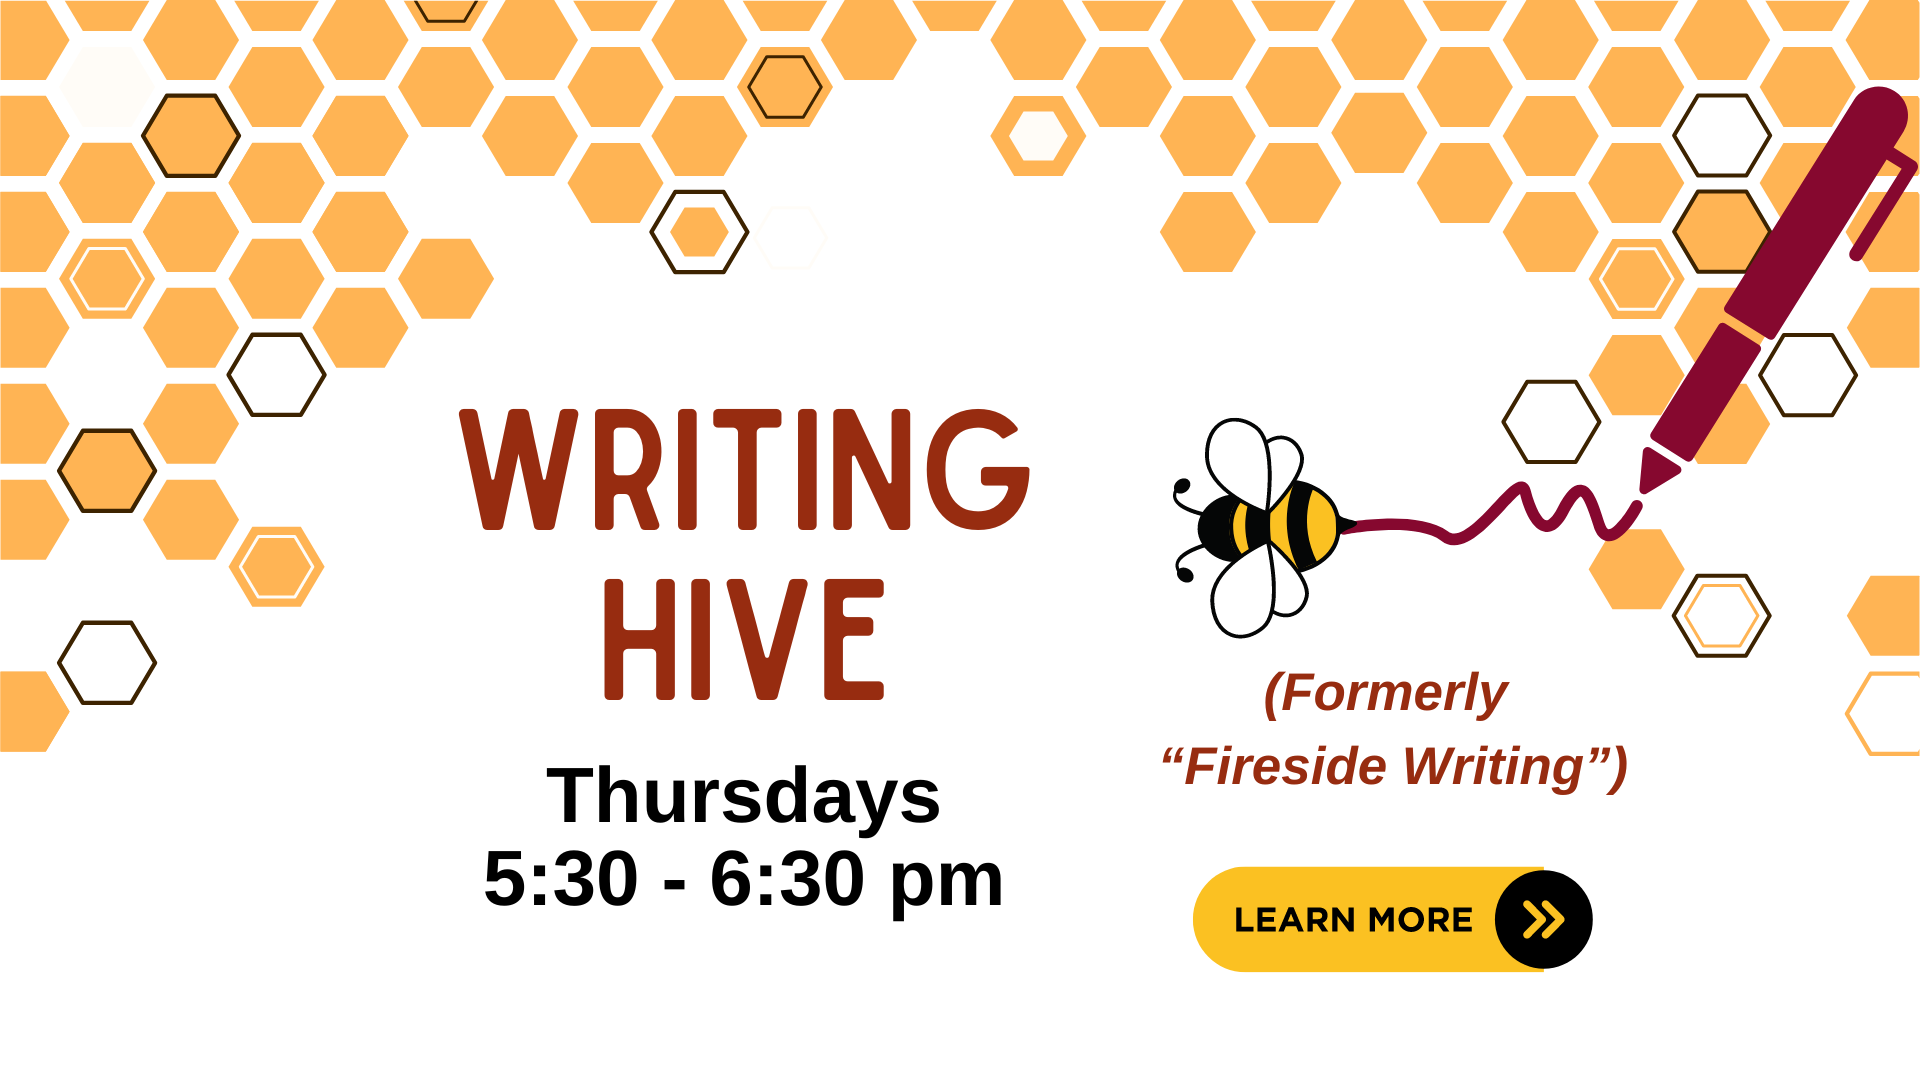 a honeycomb with a bee and a pen, and the words "Writing Hive" with a link to more information